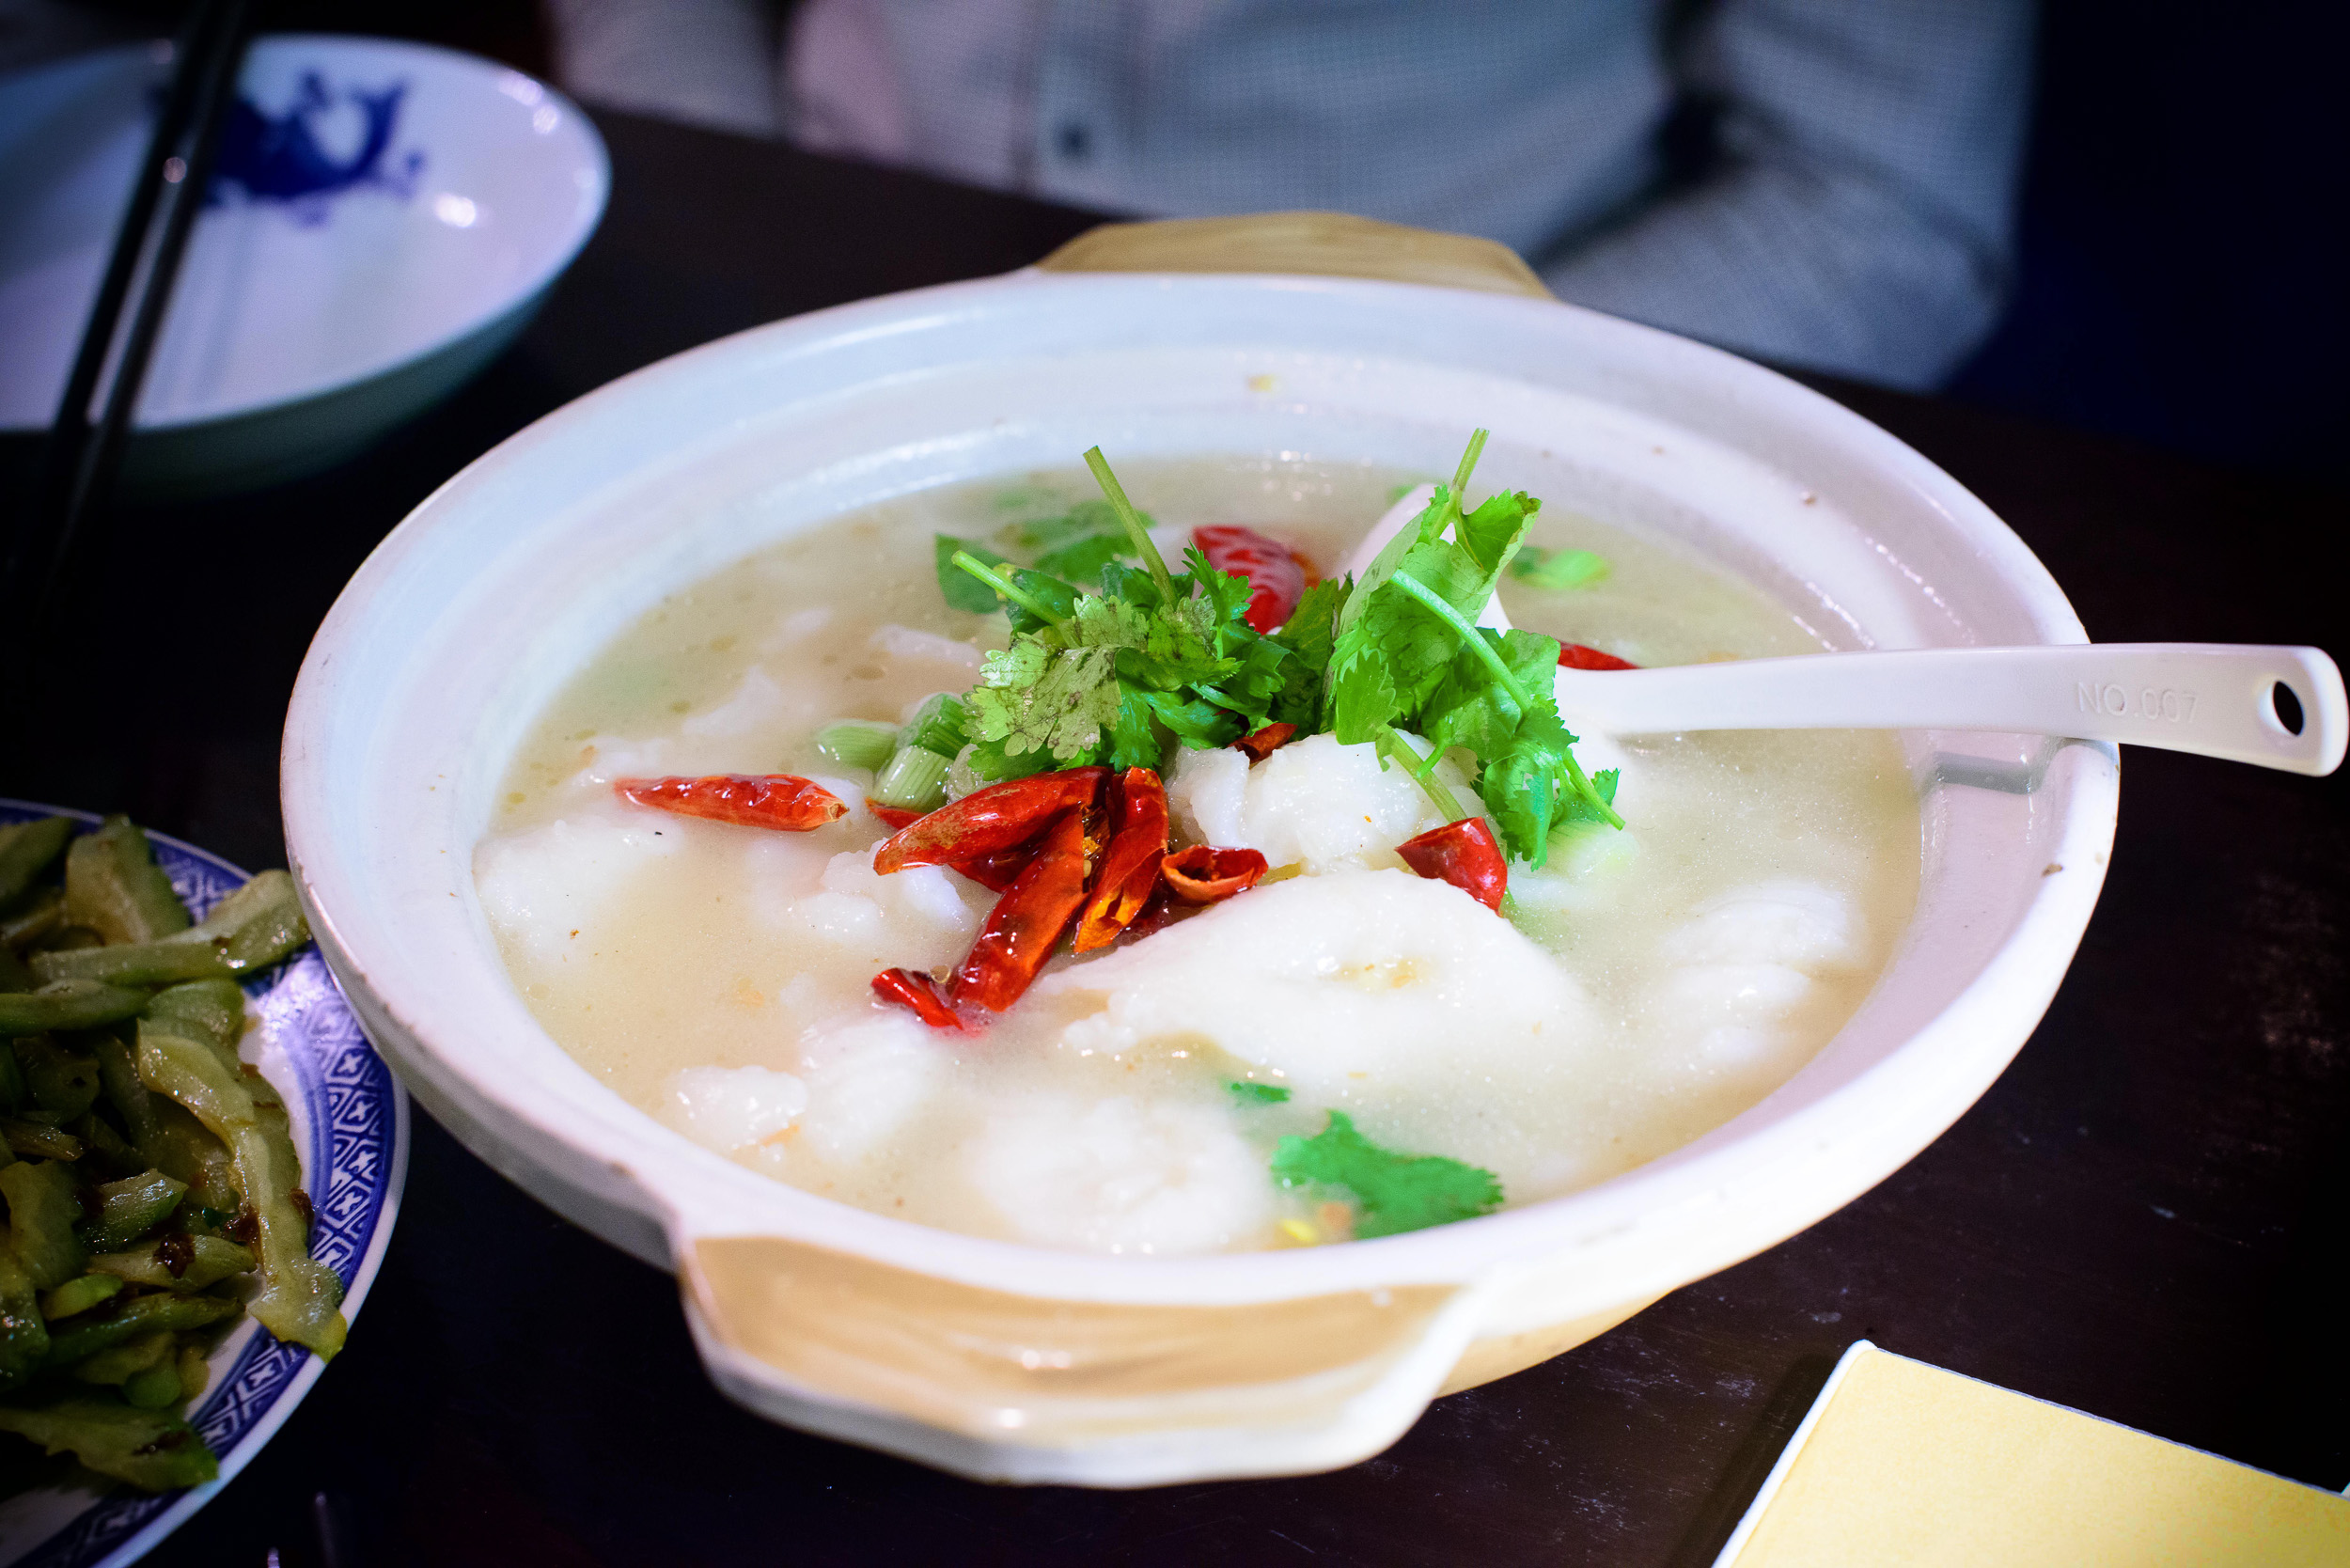 Chongqing braised fish in white soup, tilapia with boo choi and